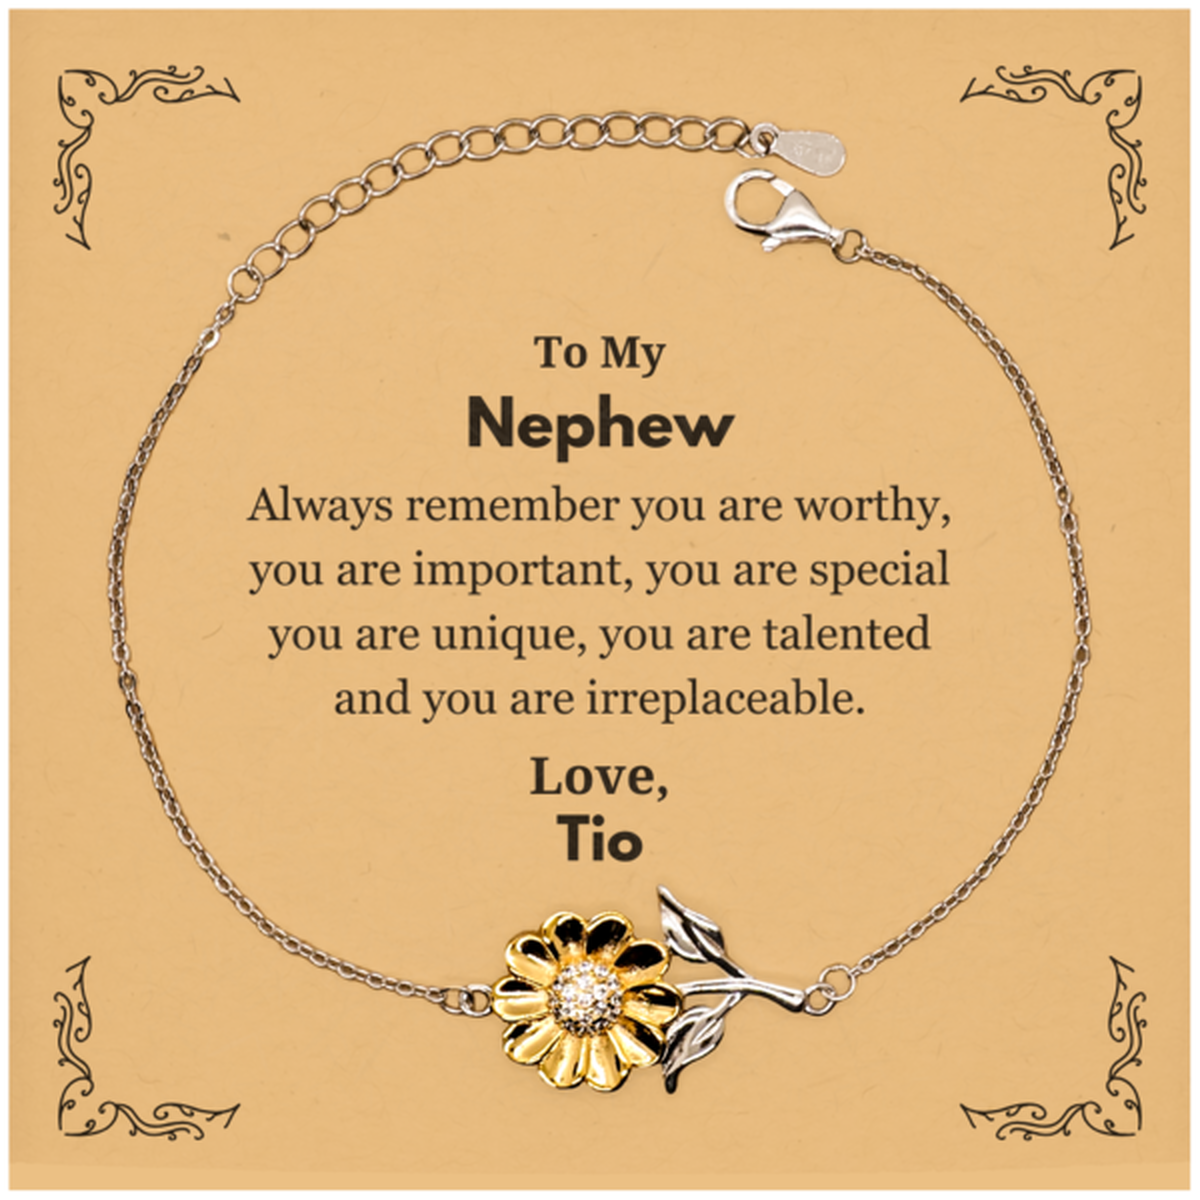 Nephew Birthday Gifts from Tio, Inspirational Sunflower Bracelet for Nephew Christmas Graduation Gifts for Nephew Always remember you are worthy, you are important. Love, Tio